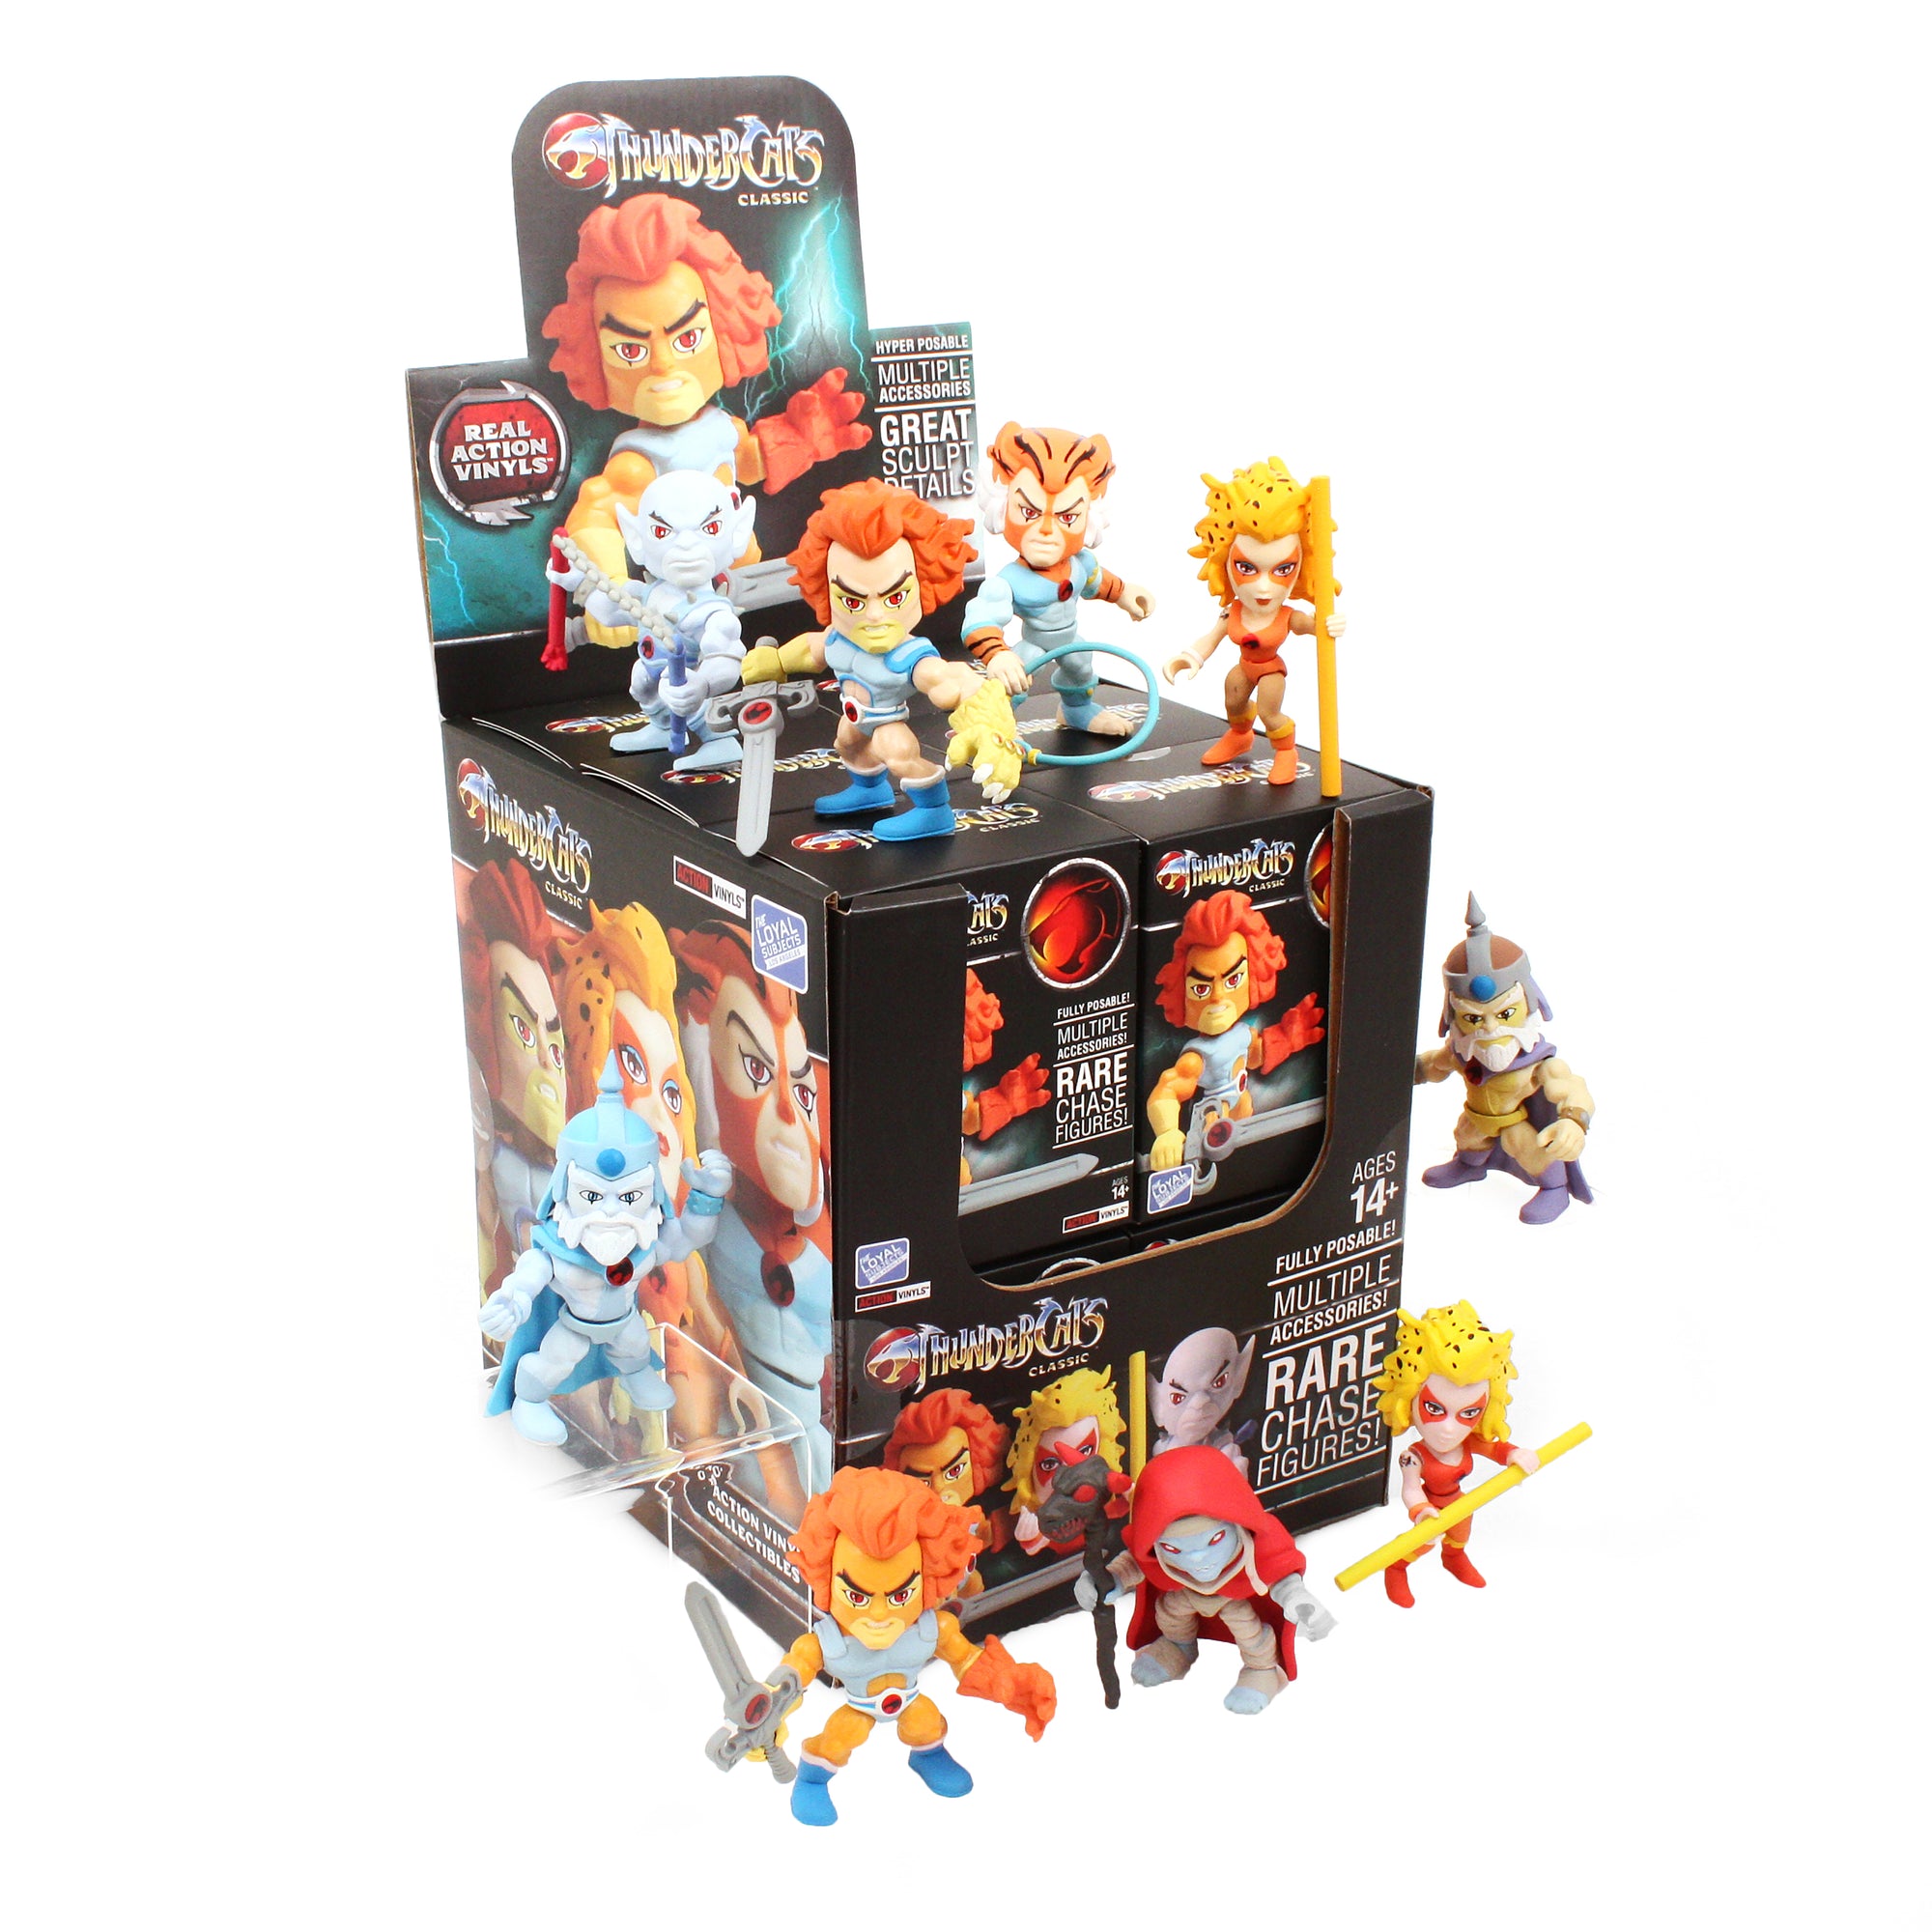 Thundercats Wave 1 Action Vinyls Blind Box Series by The Loyal Subjects